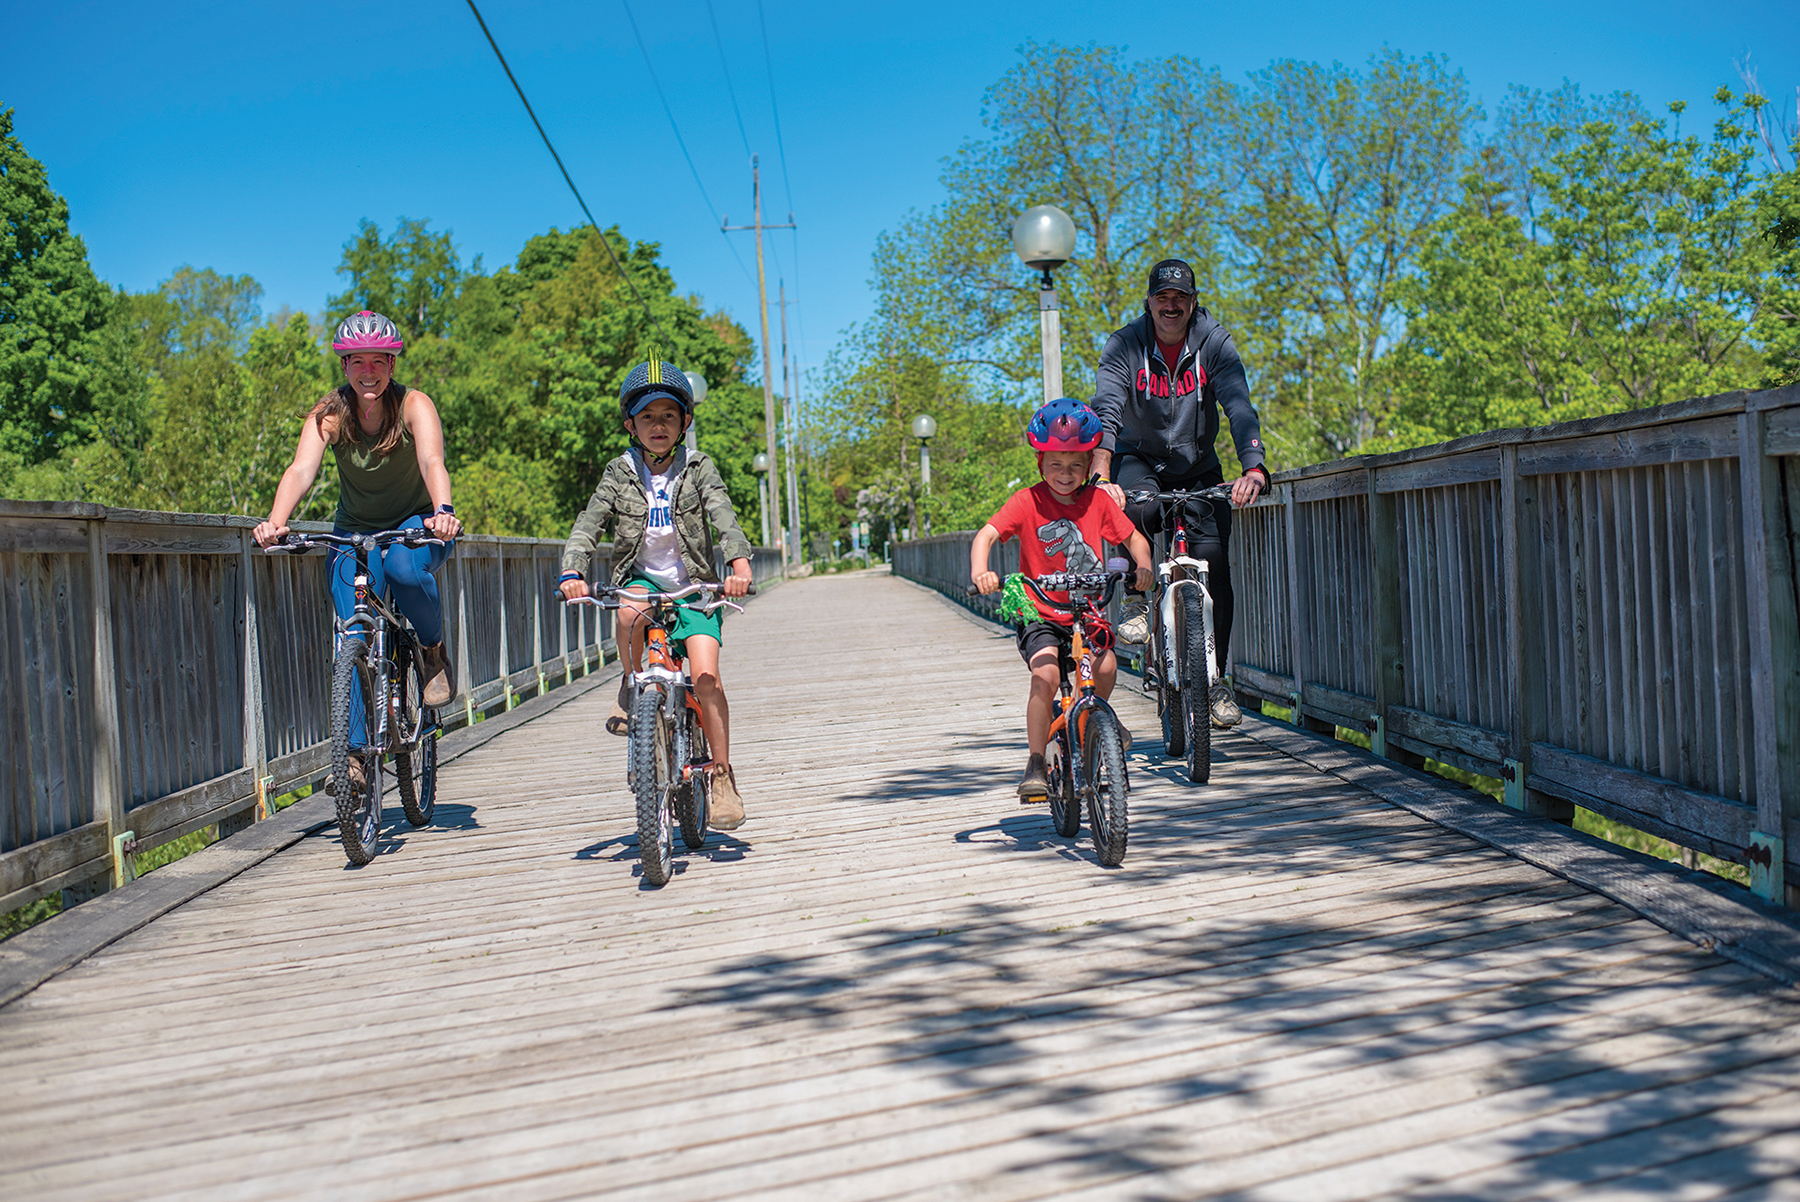 he McDonald Family – Jen, Kent, Cooper and Mason – have some well-deserved treats from the Thornbury Bakery Café after a ride along the wooden bridge that crosses the Beaver River in Thornbury.